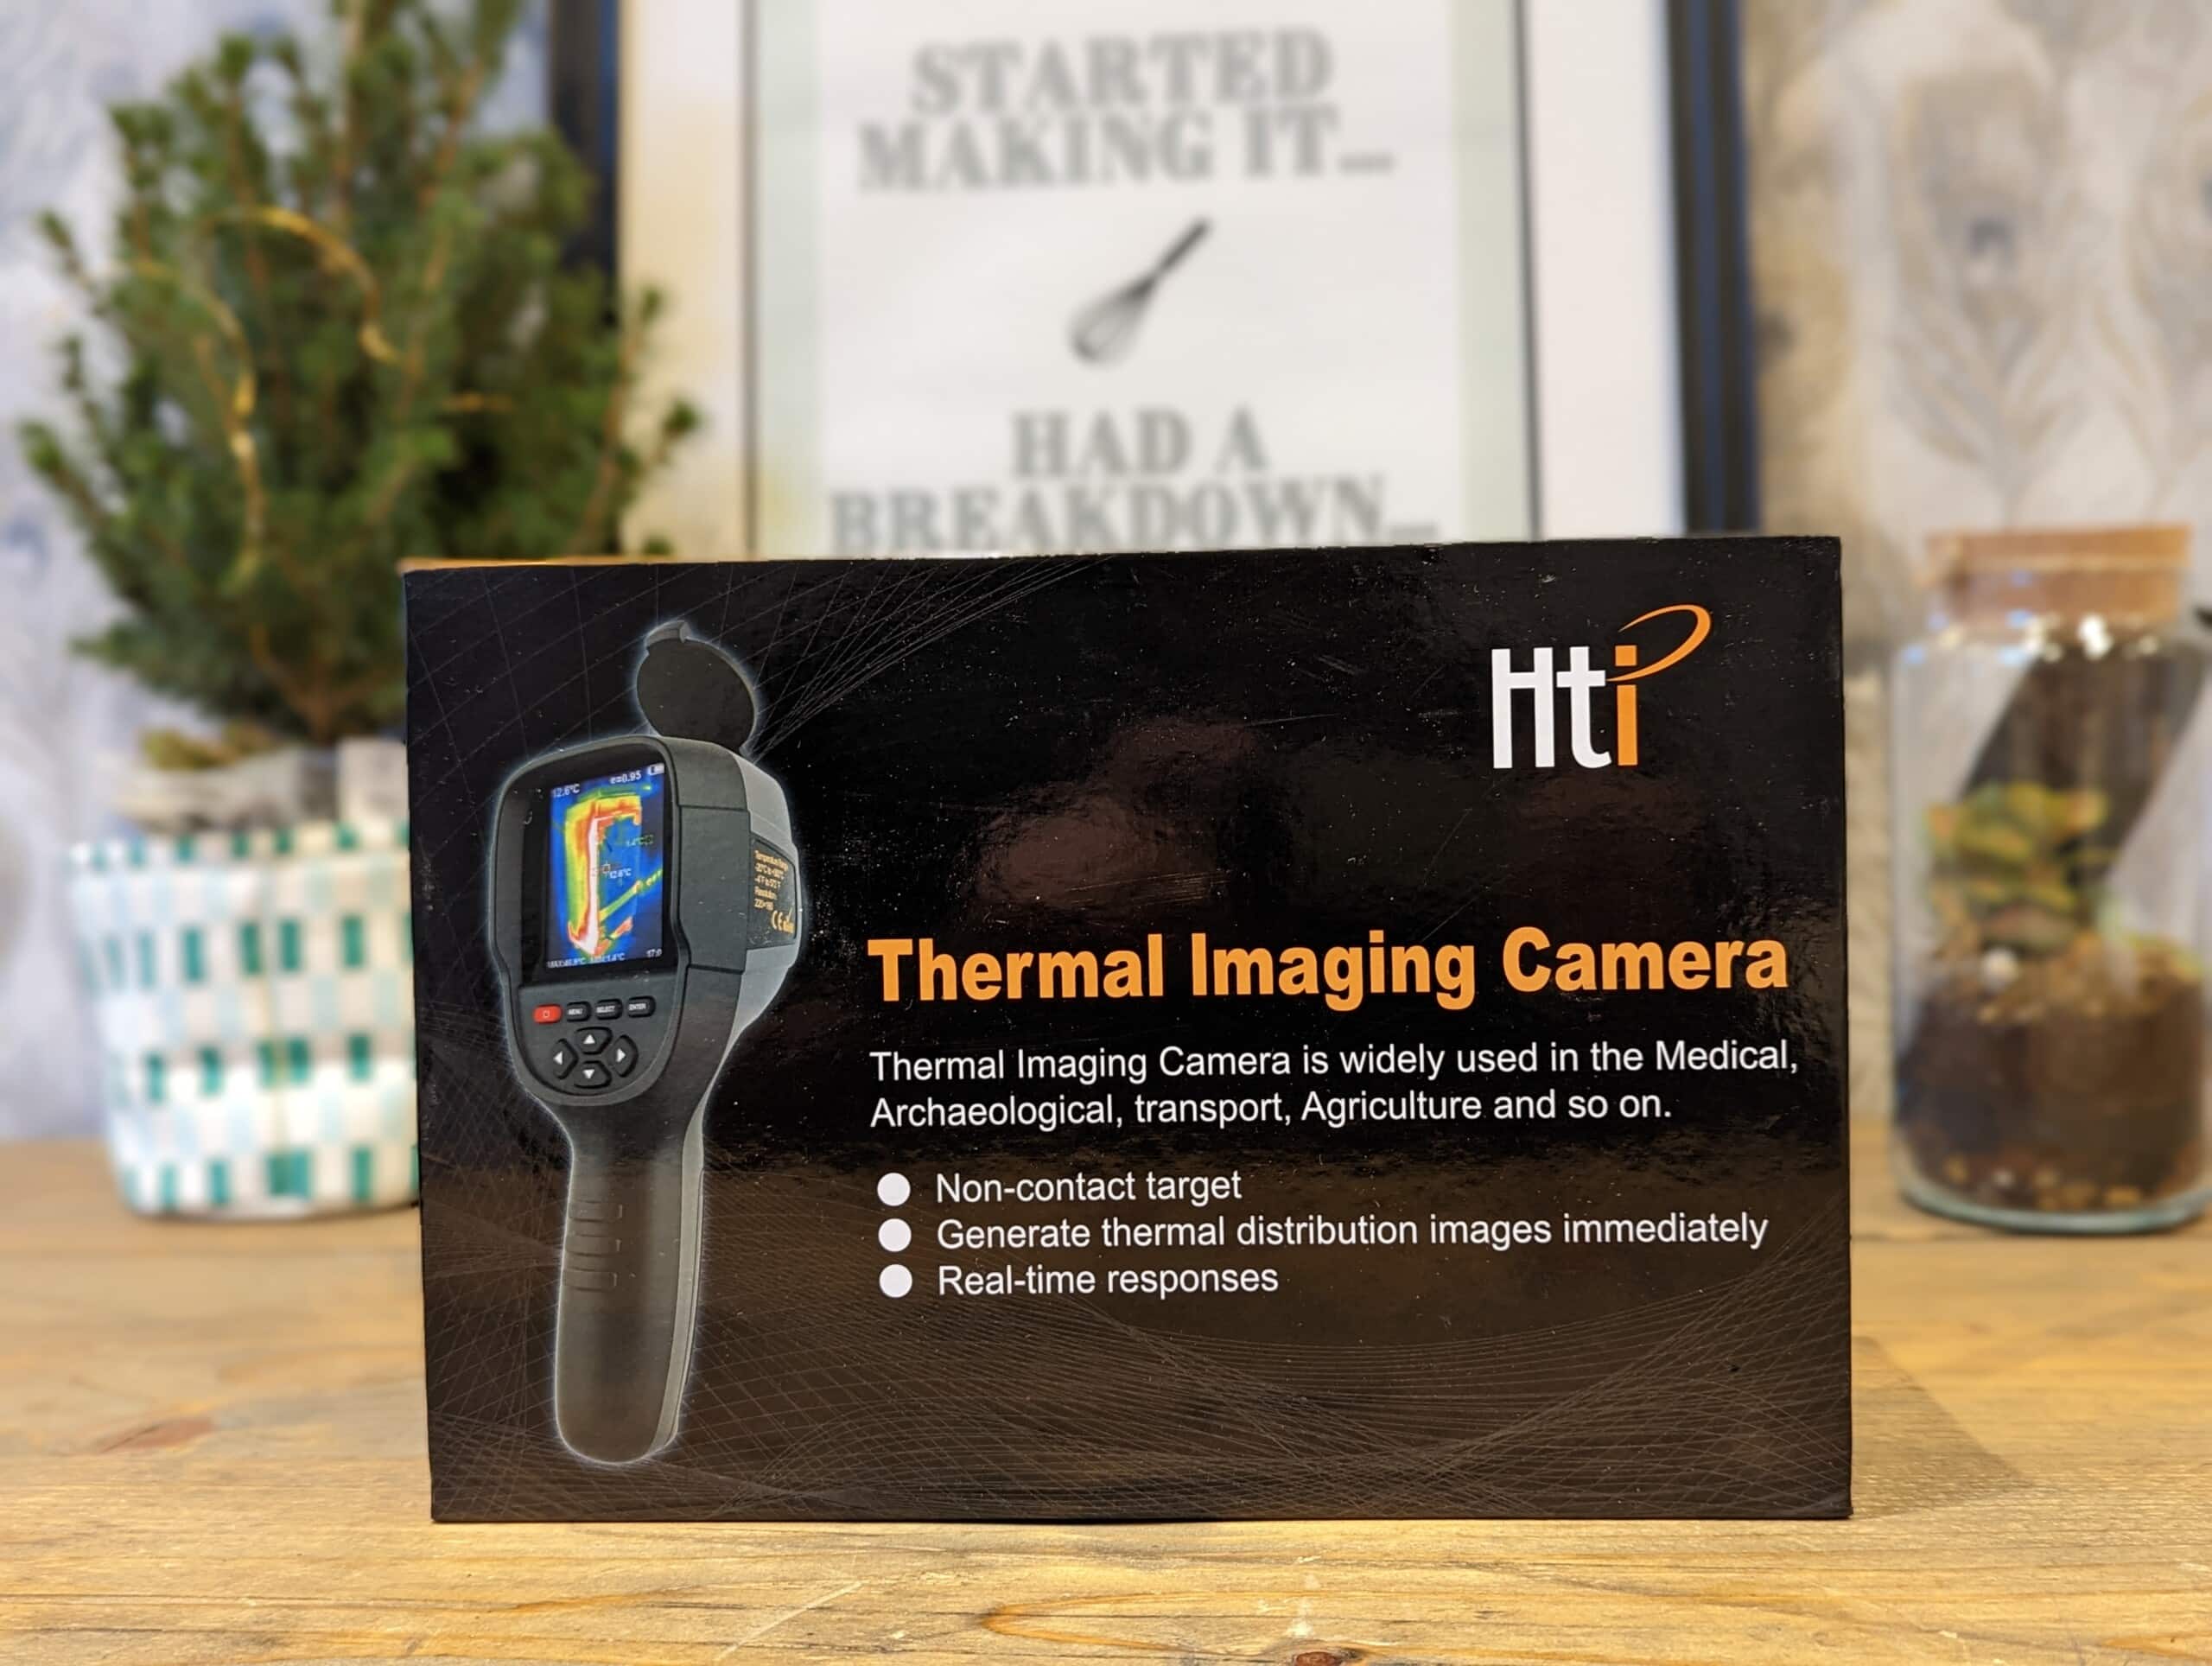 Using a thermal camera to reduce draughts & heating costs: HTI-Xintai HTI-19 infrared thermal imaging camera review